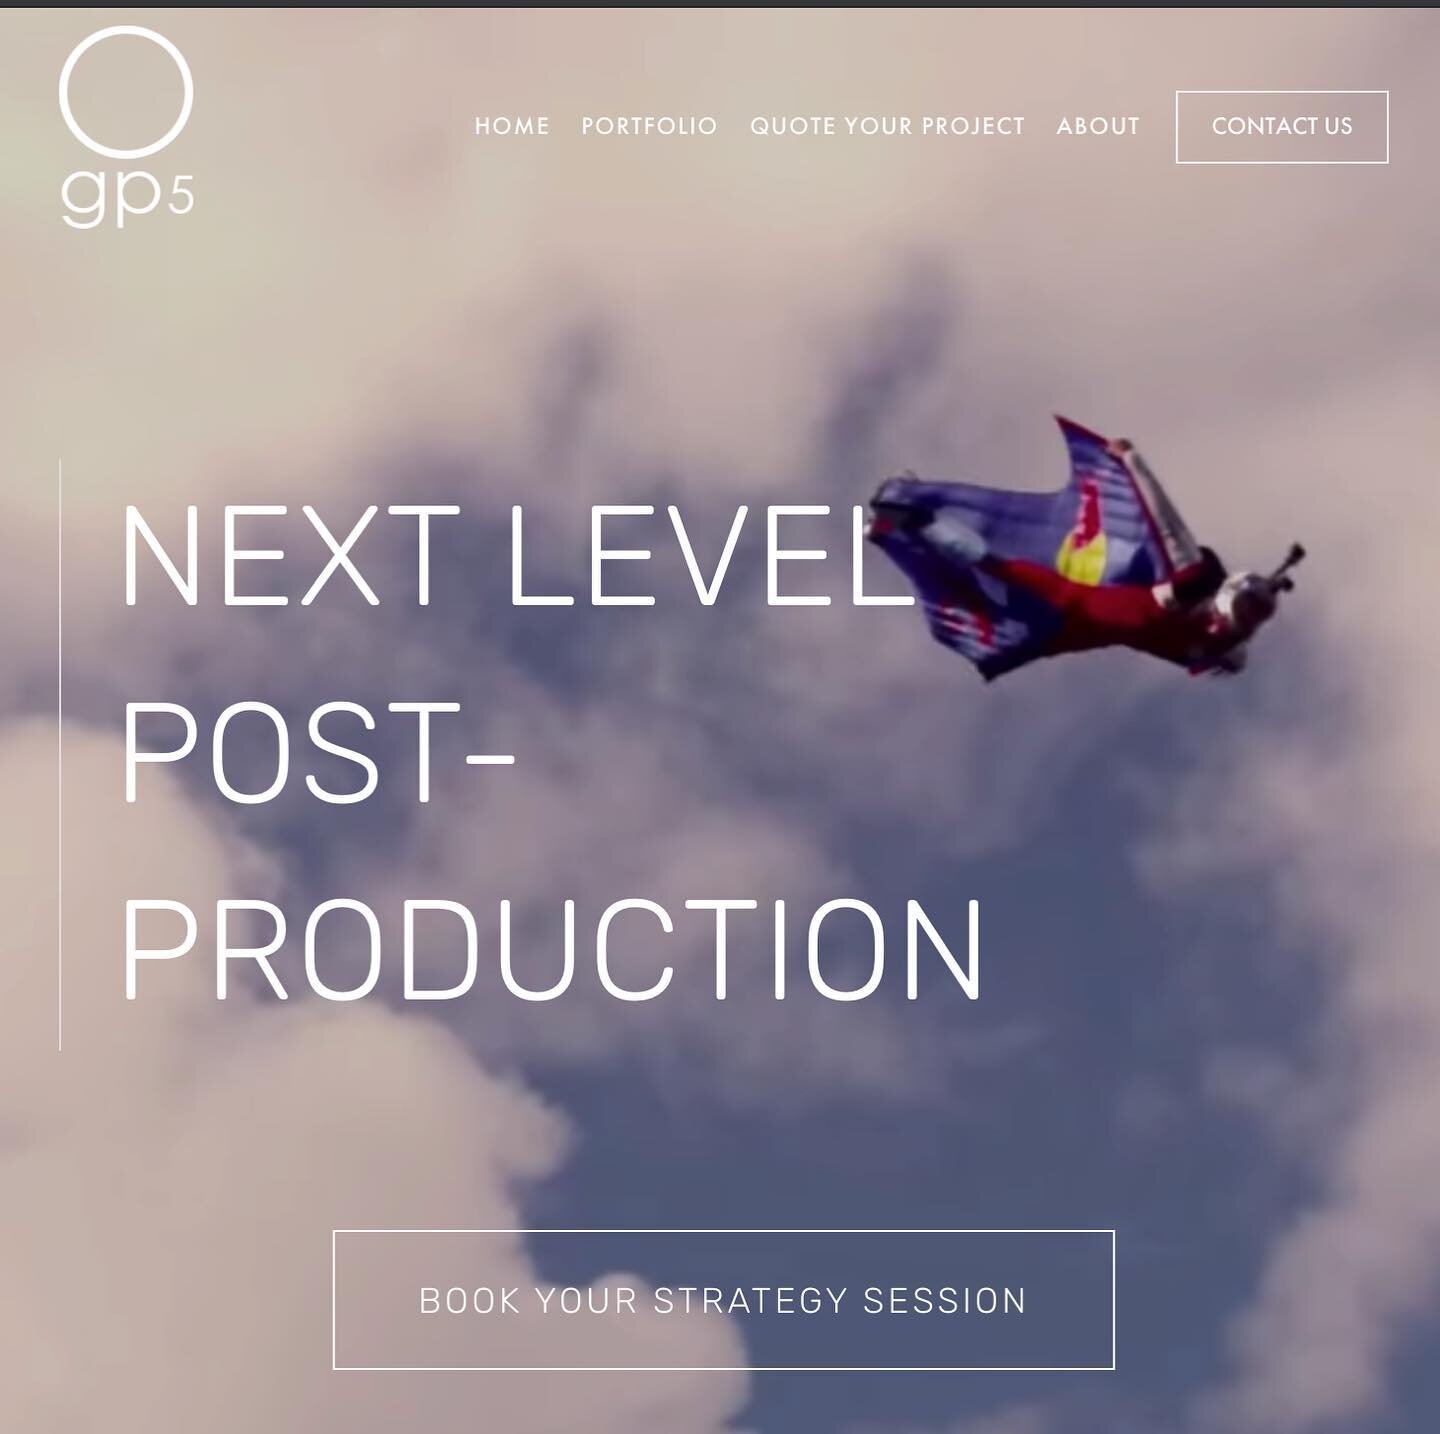 Gp5 is here to help you with your post production for your next visual projects. Our team has the capacity to take your project to the next level wether it&rsquo;s editorial, workflow design, media management, color correction, sound mixing or promot